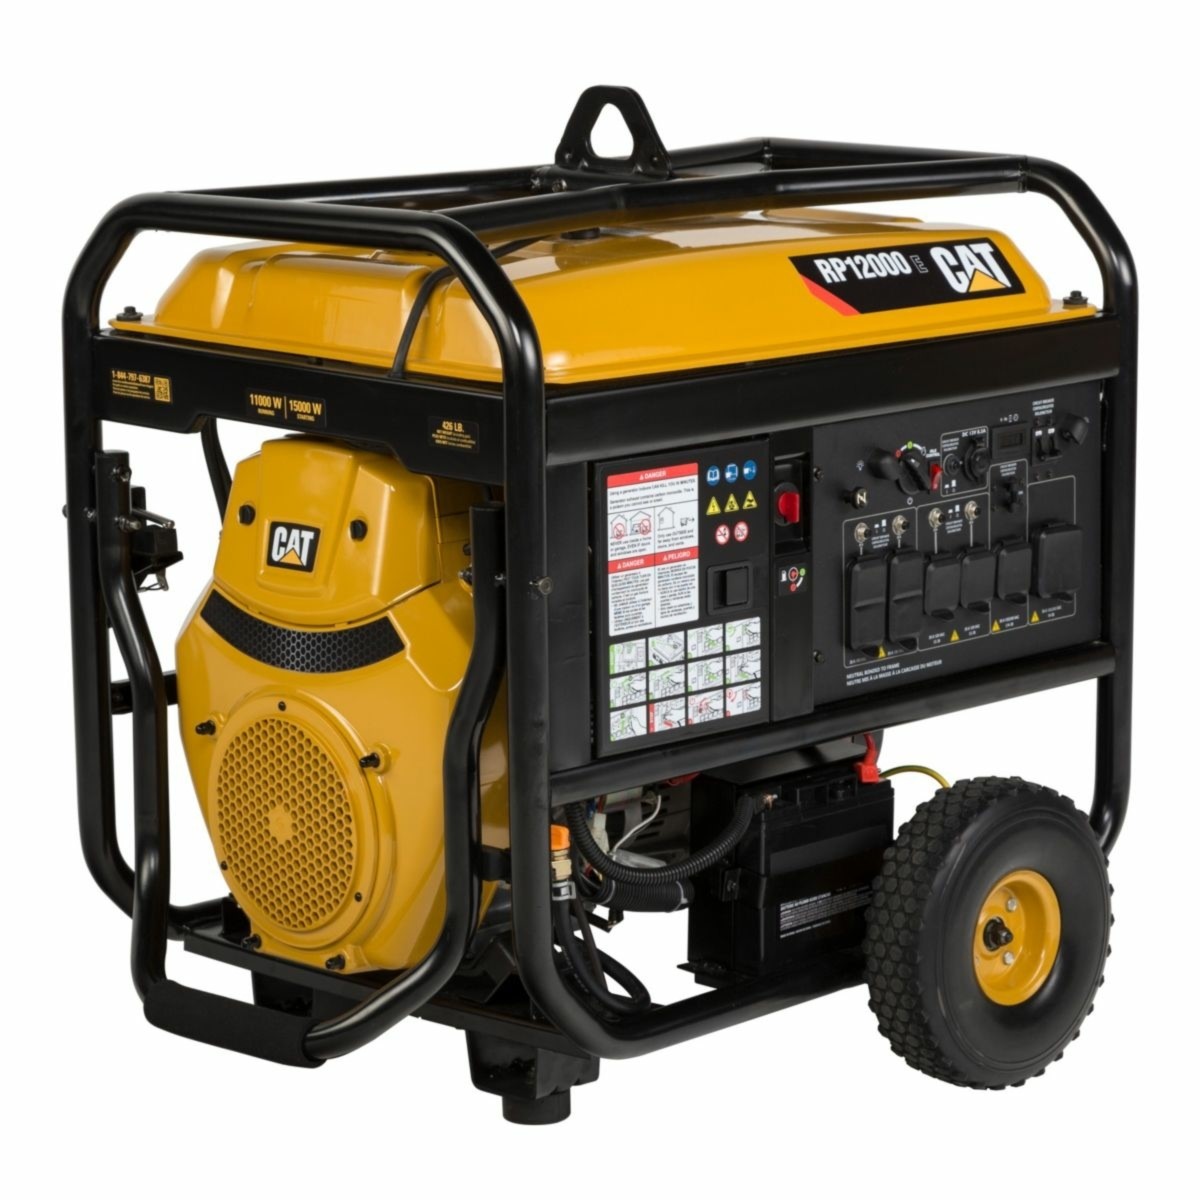 How does a generator work?